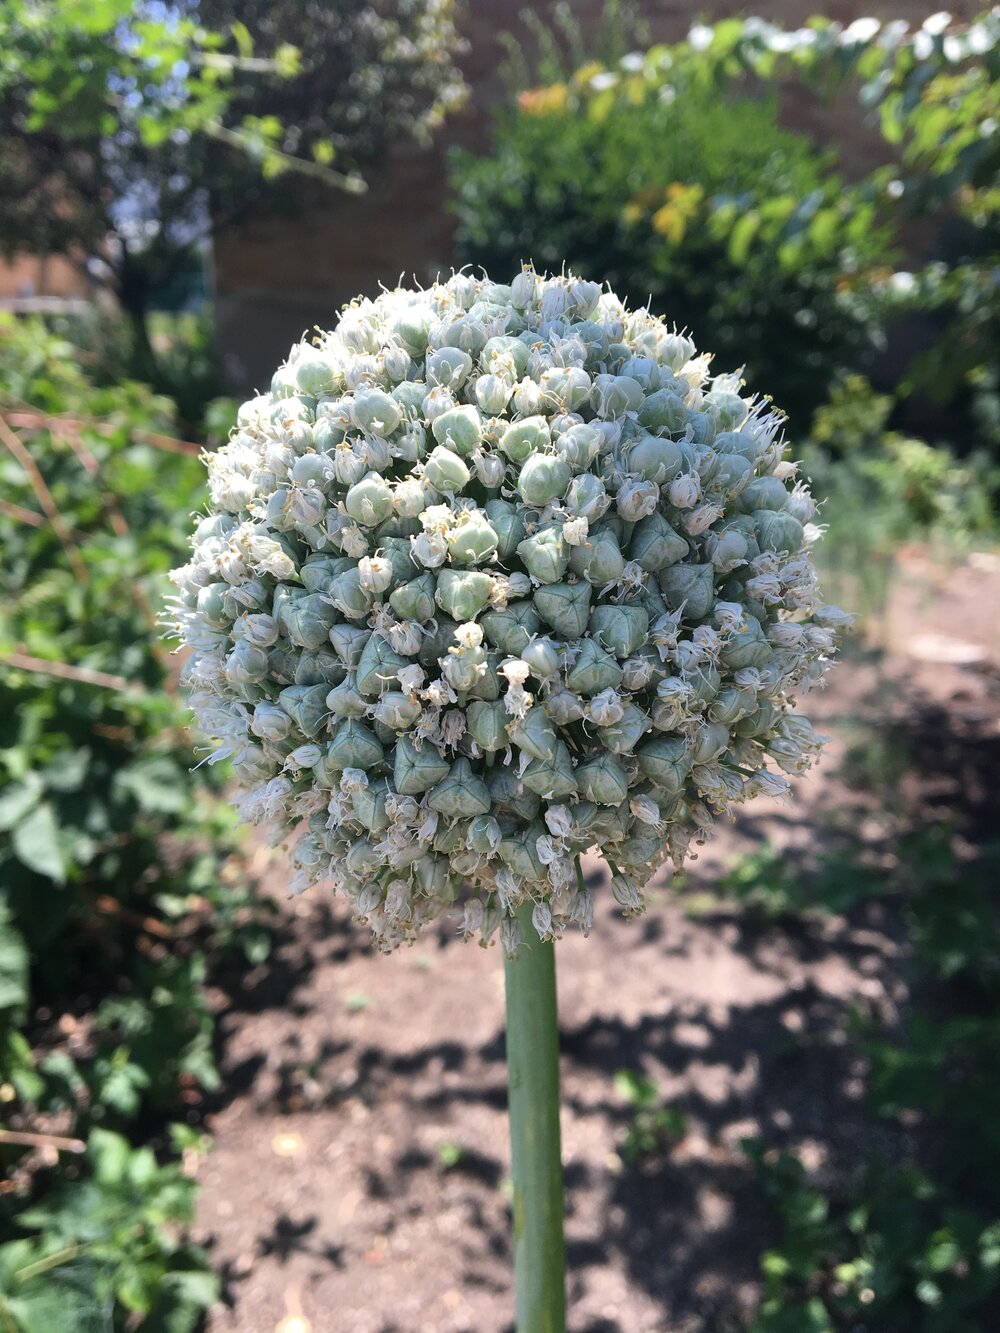  Onion Flower  Onion flowers—and the flowers of their relatives leeks and chives—repel many insects in the vegetable garden, including slugs, aphids, carrot flies and cabbage worms. Plant them near your cabbages, as well as near the crucifers, tomato